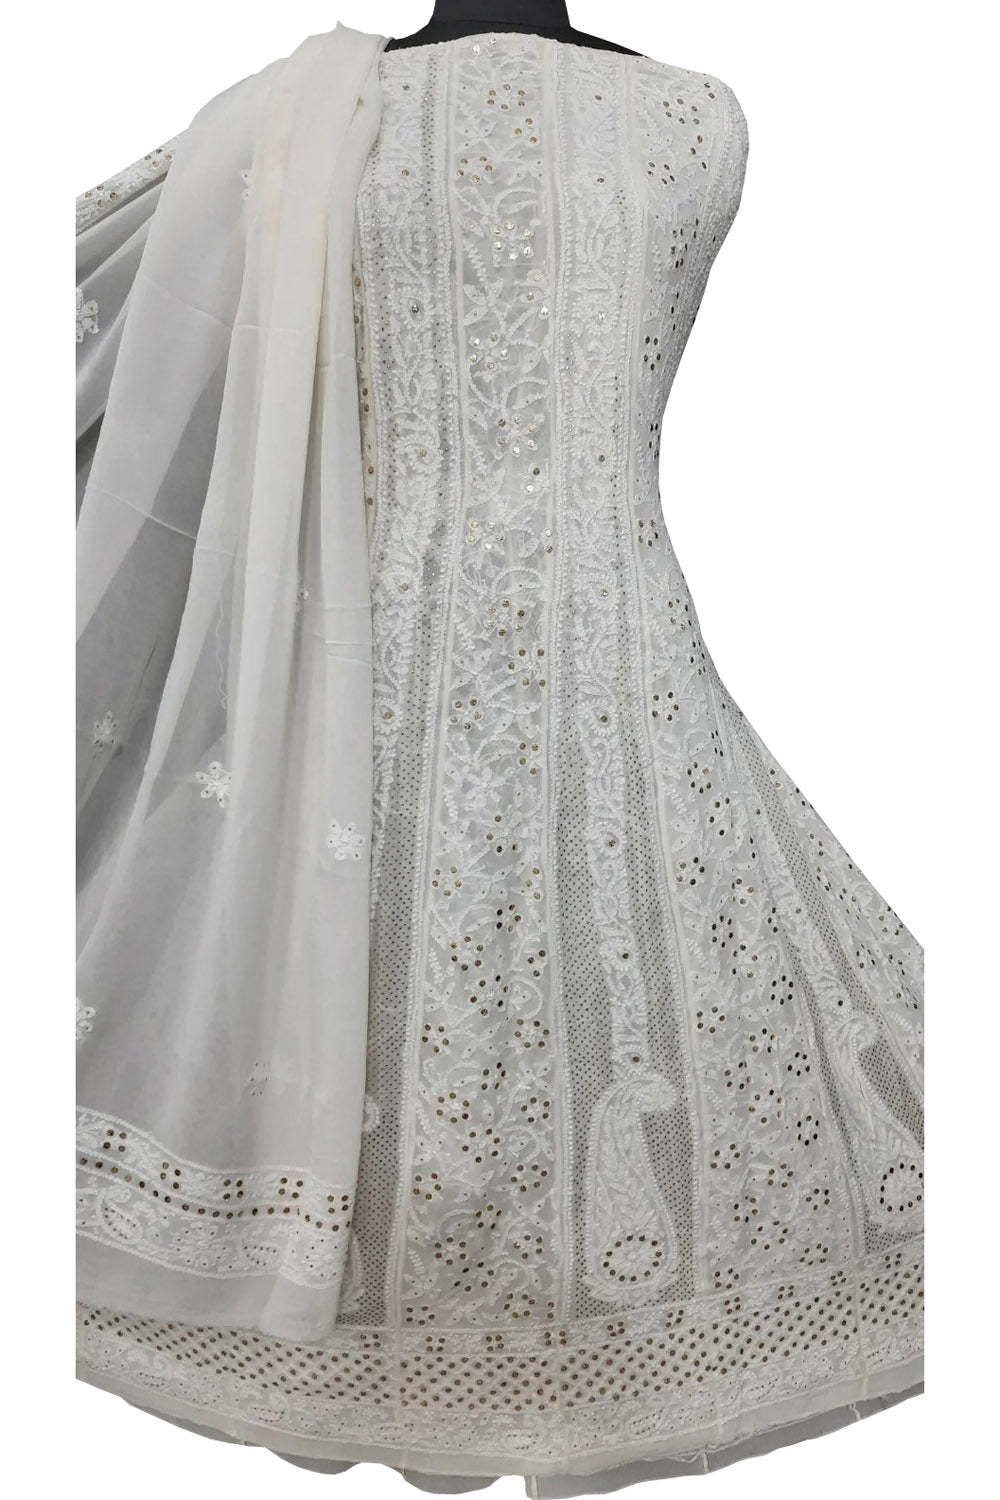 Dyeable Hand Embroidered Chikankari Georgette Anarkali Unstitched Suit Set With Mukaish Work